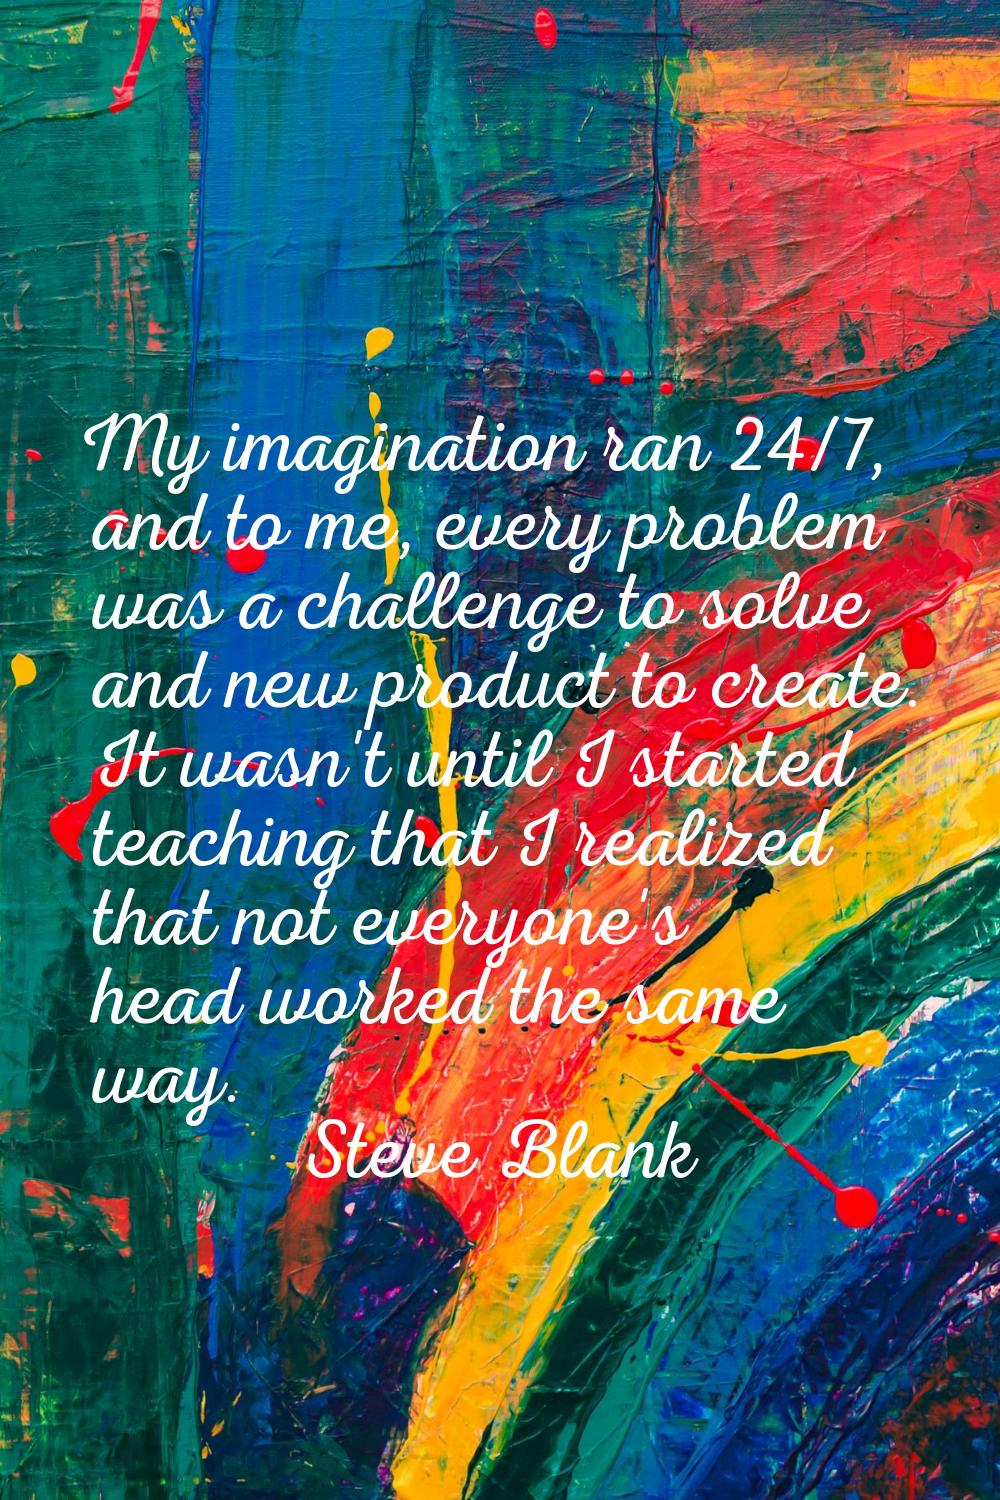 My imagination ran 24/7, and to me, every problem was a challenge to solve and new product to creat